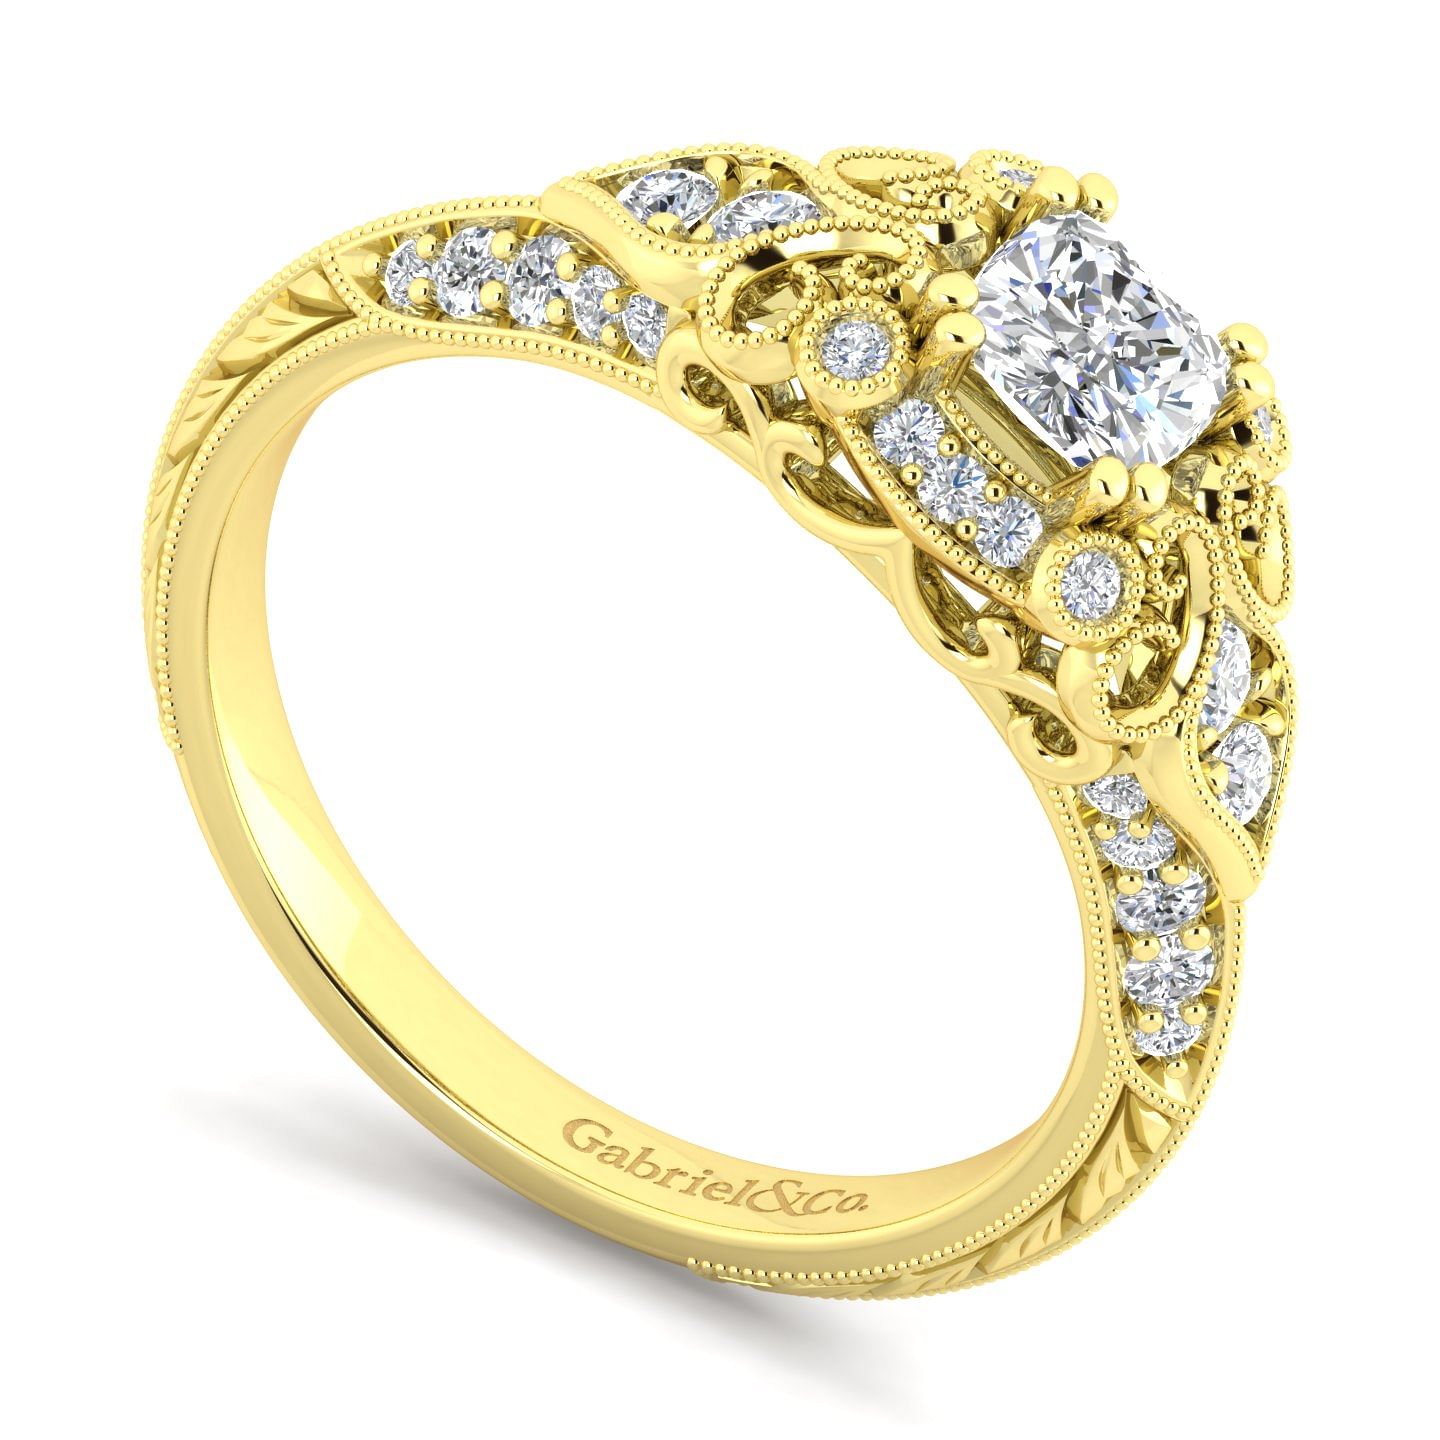 Unique 14K Yellow Gold Vintage Inspired Cushion Cut Diamond Halo Engagement Ring